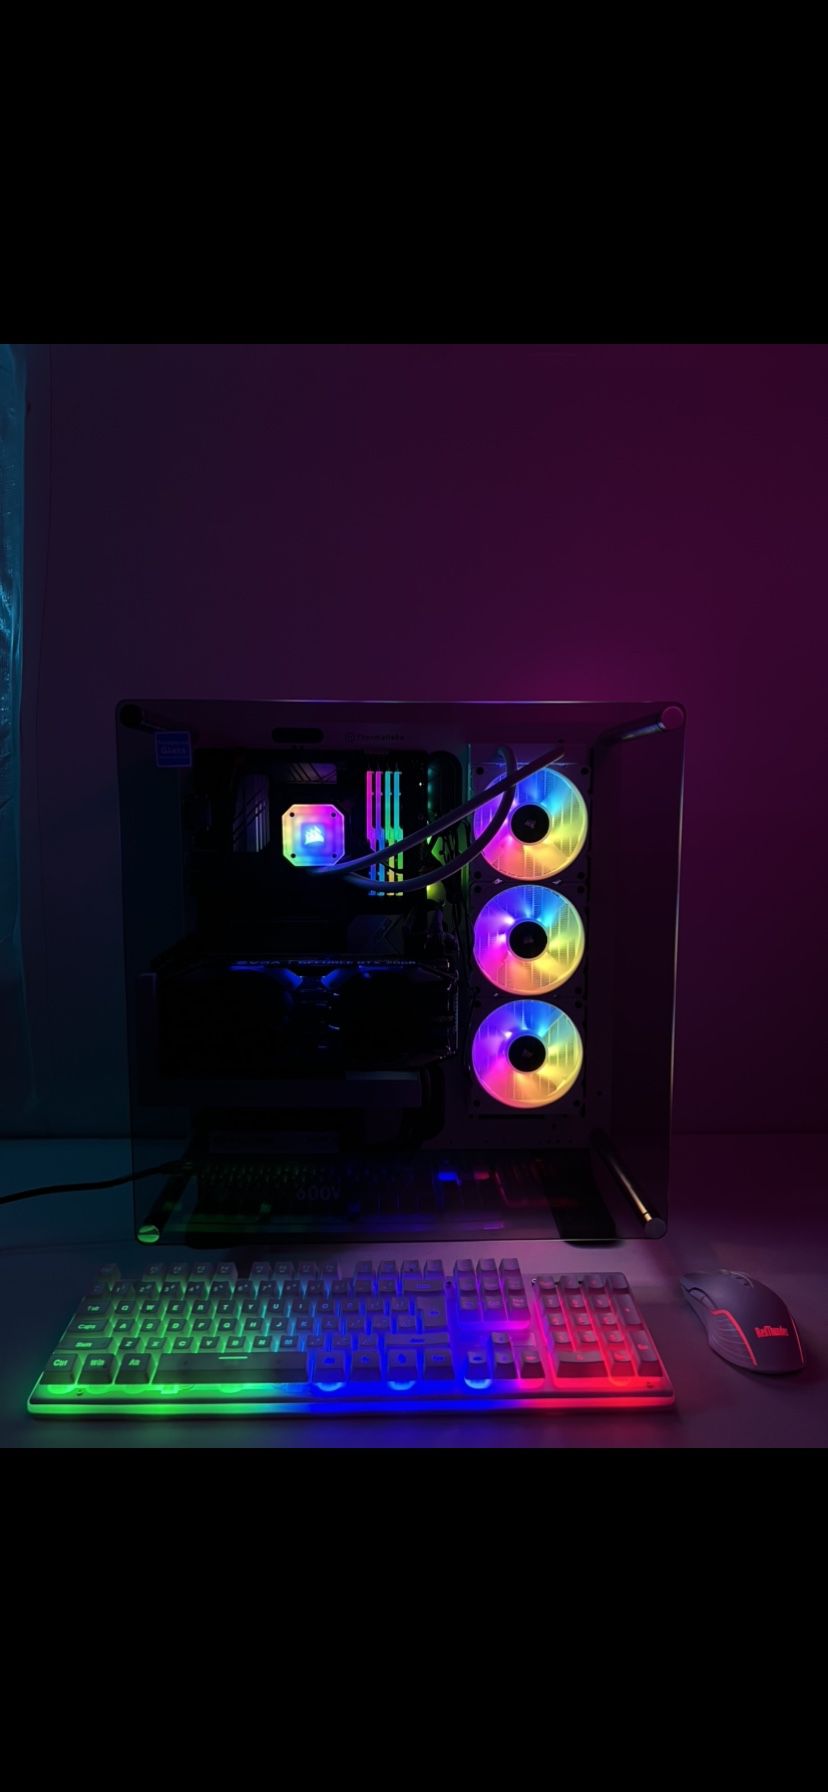 Desktop Computer RTX PC + RGB Wireless Mouse and Keyboard 